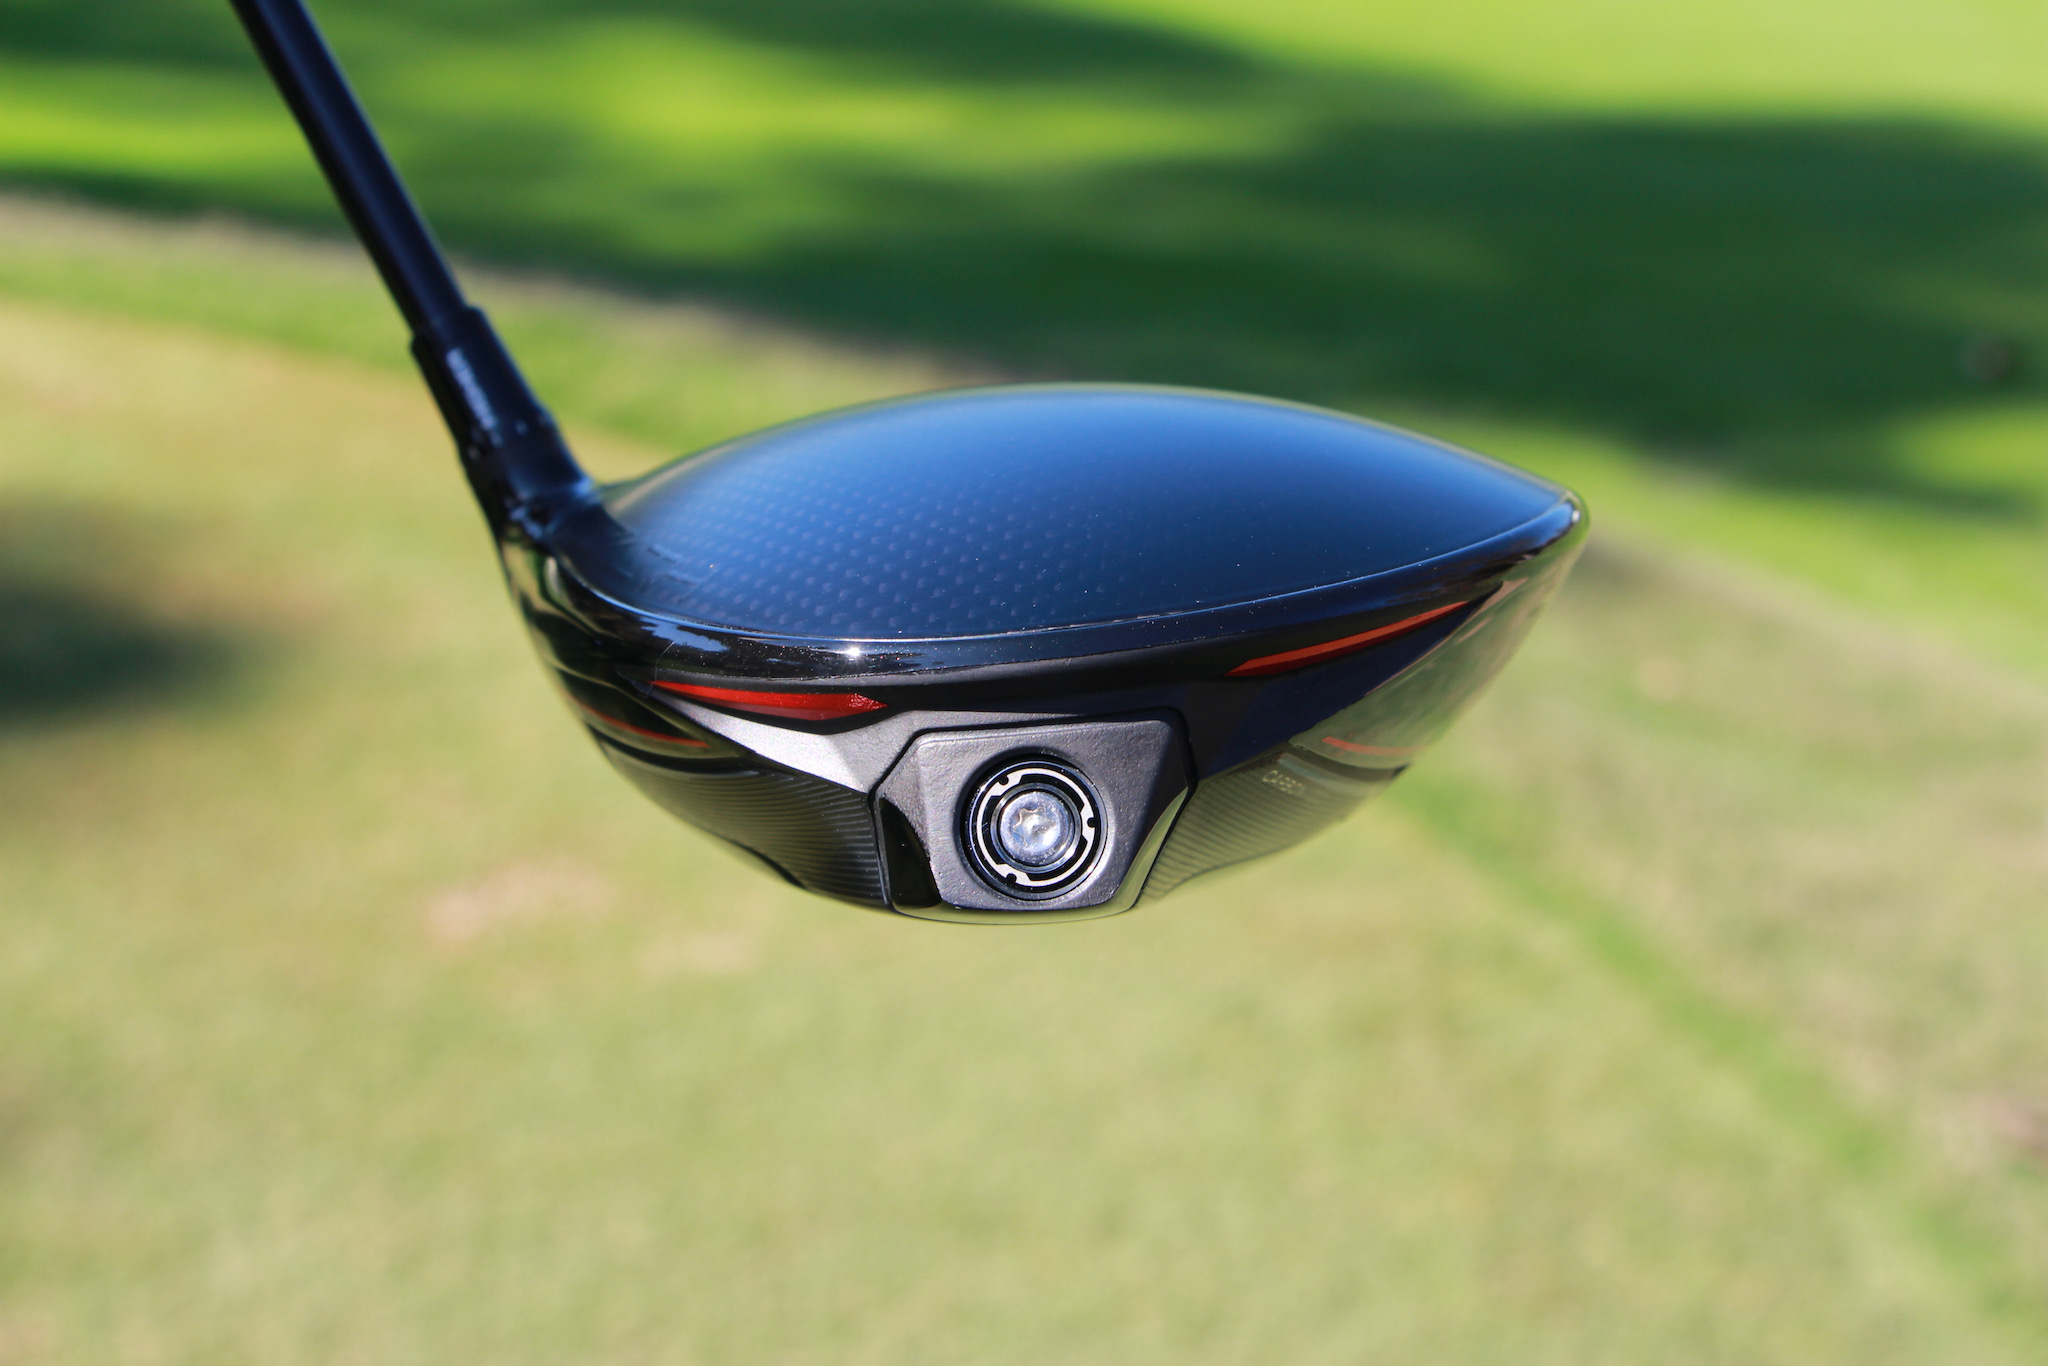 TaylorMade Stealth driver: Rear view